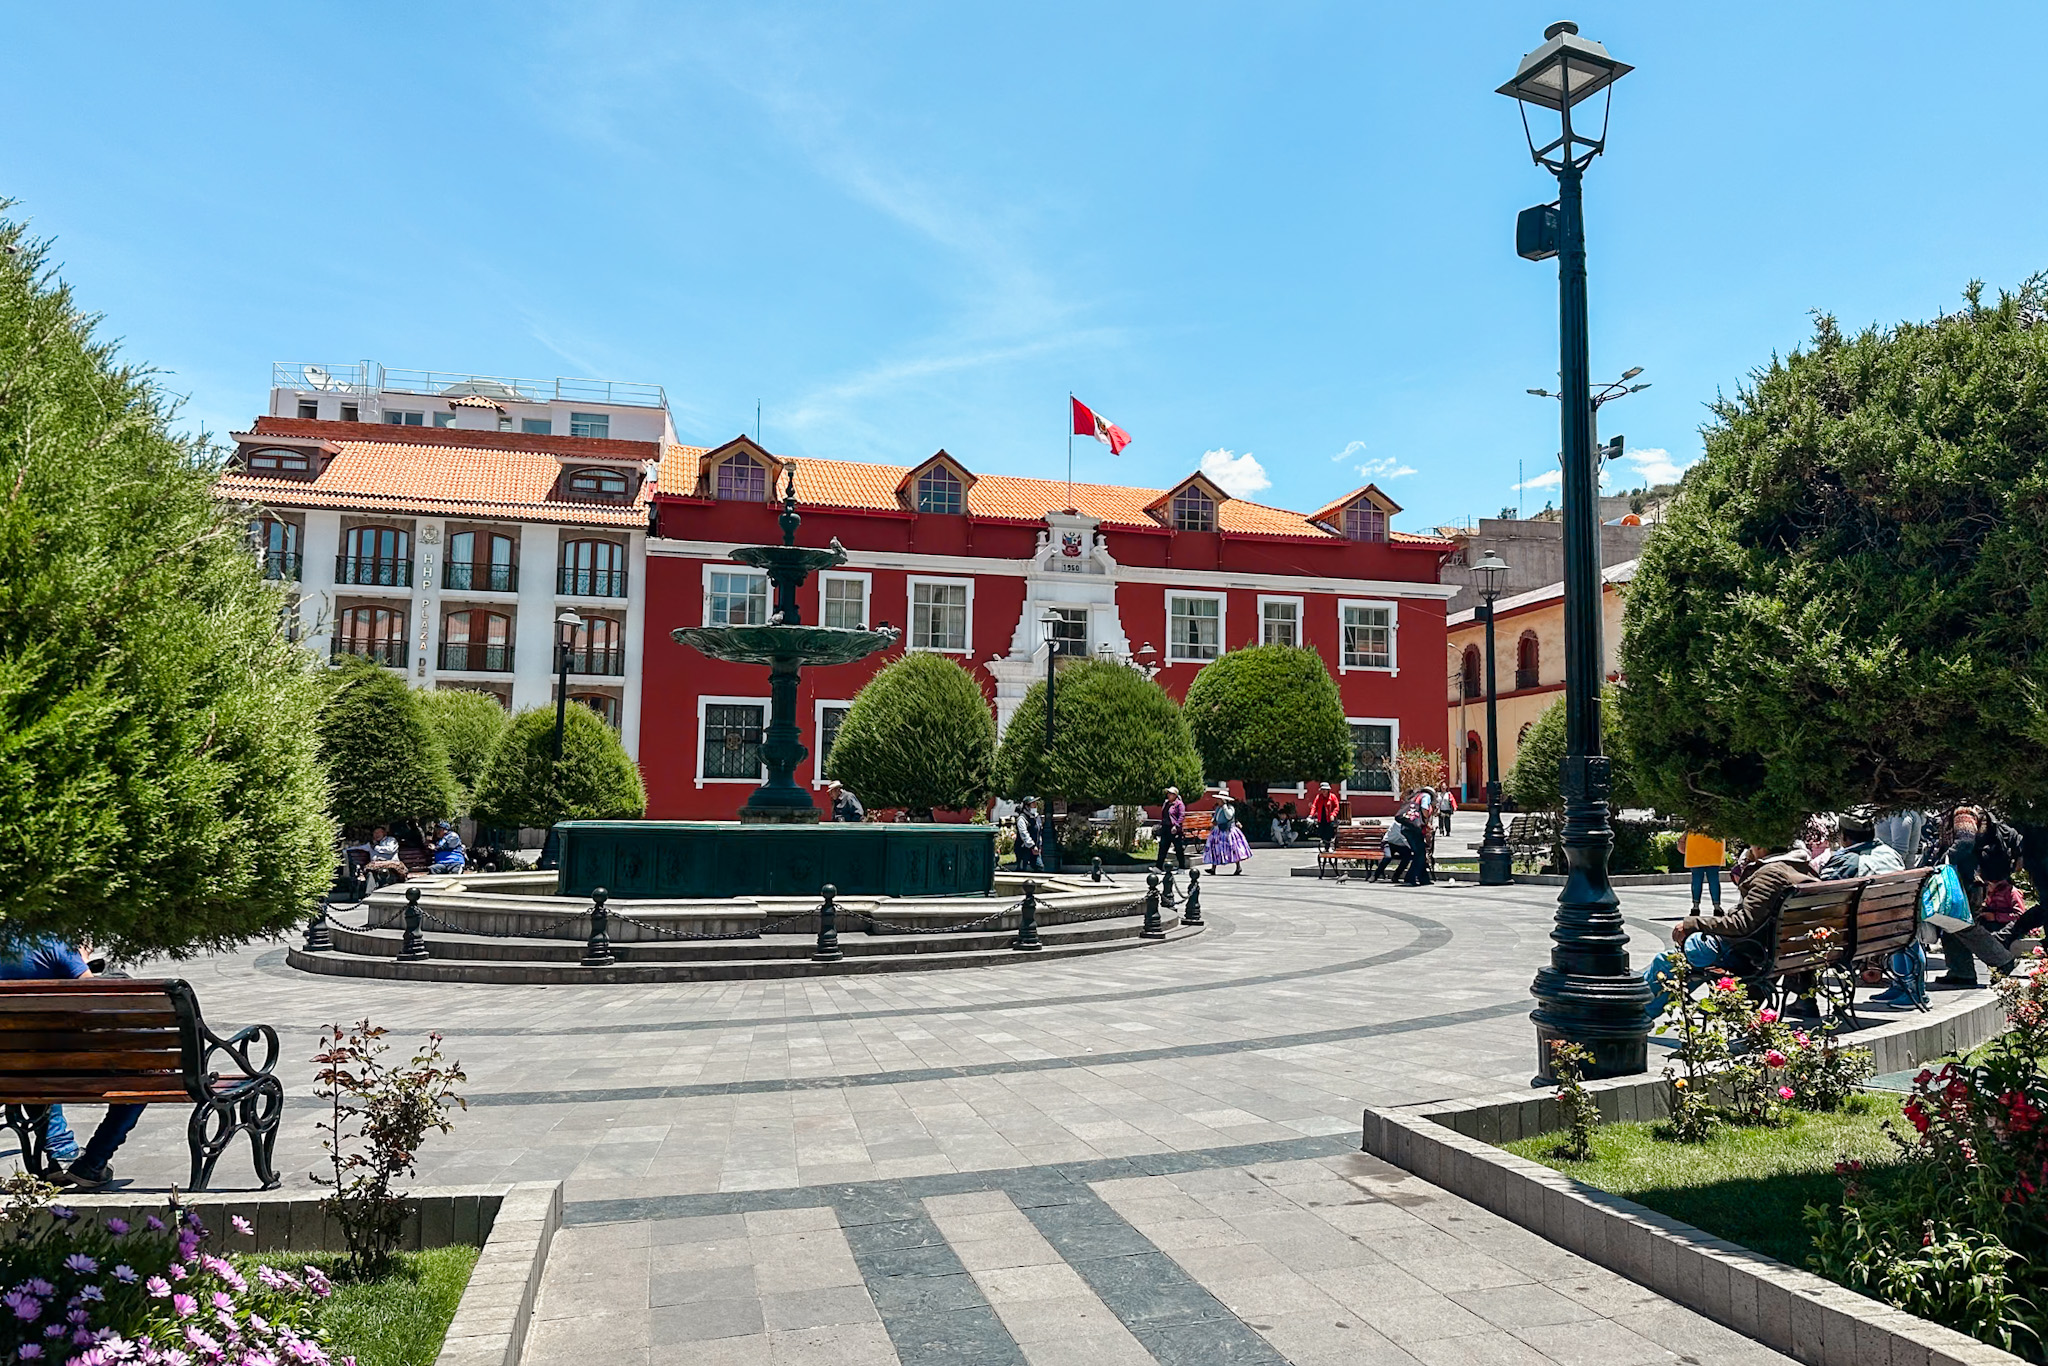 Best Things to Do in Puno - Plaza Major de Puno